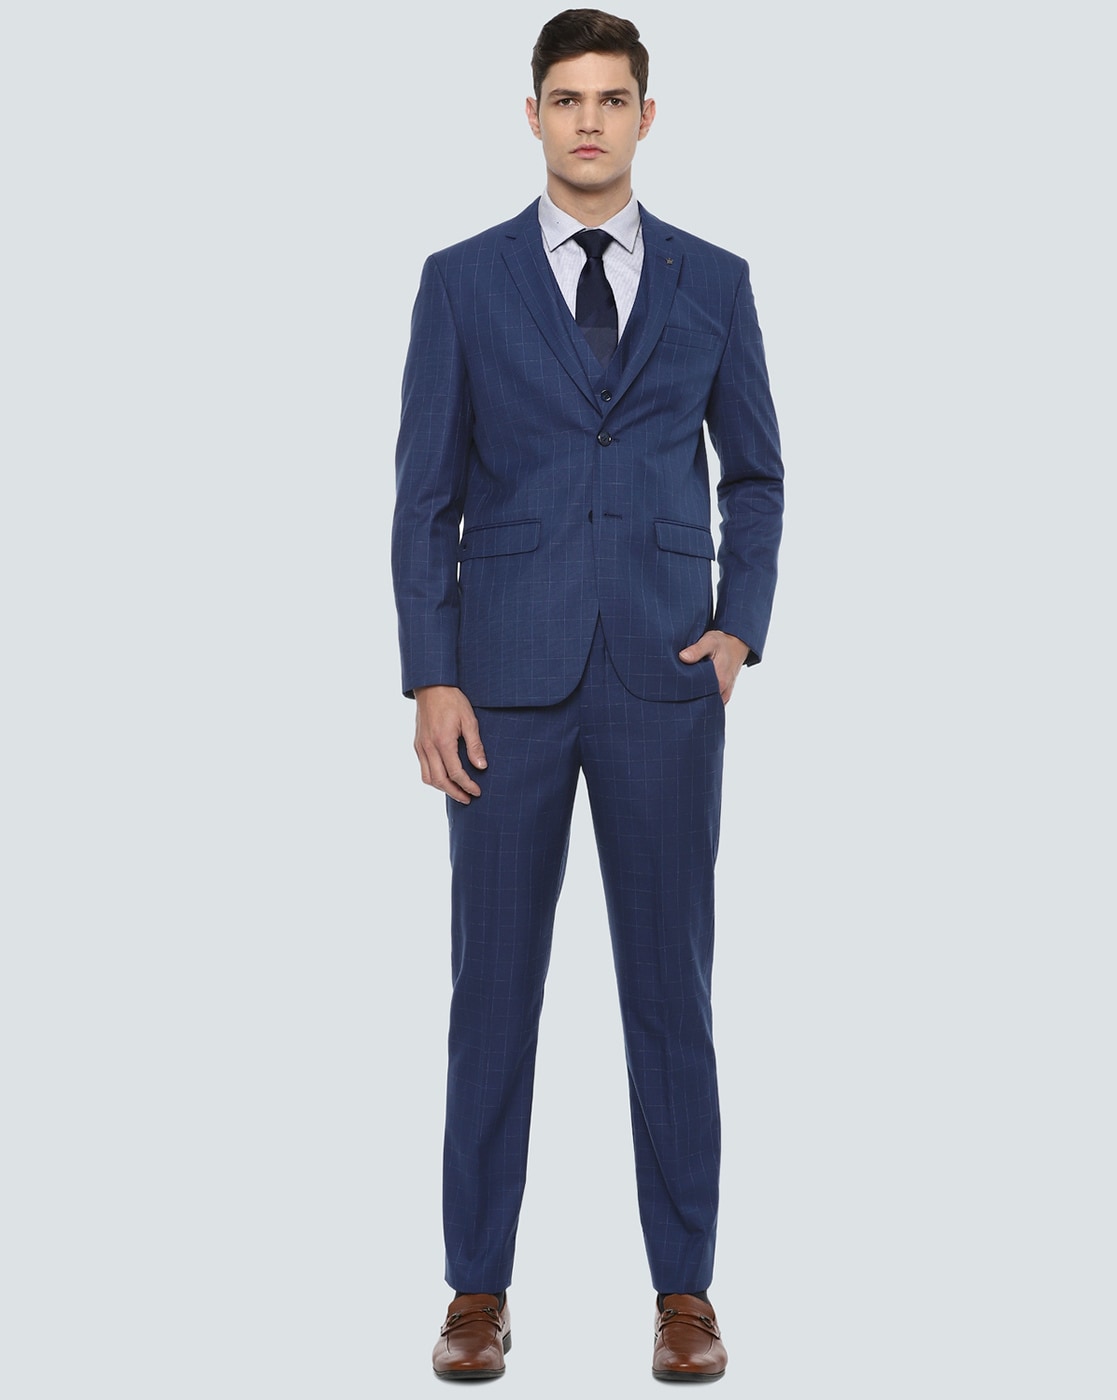 Louis Philippe - Bold yet elegant, this blue suit from our